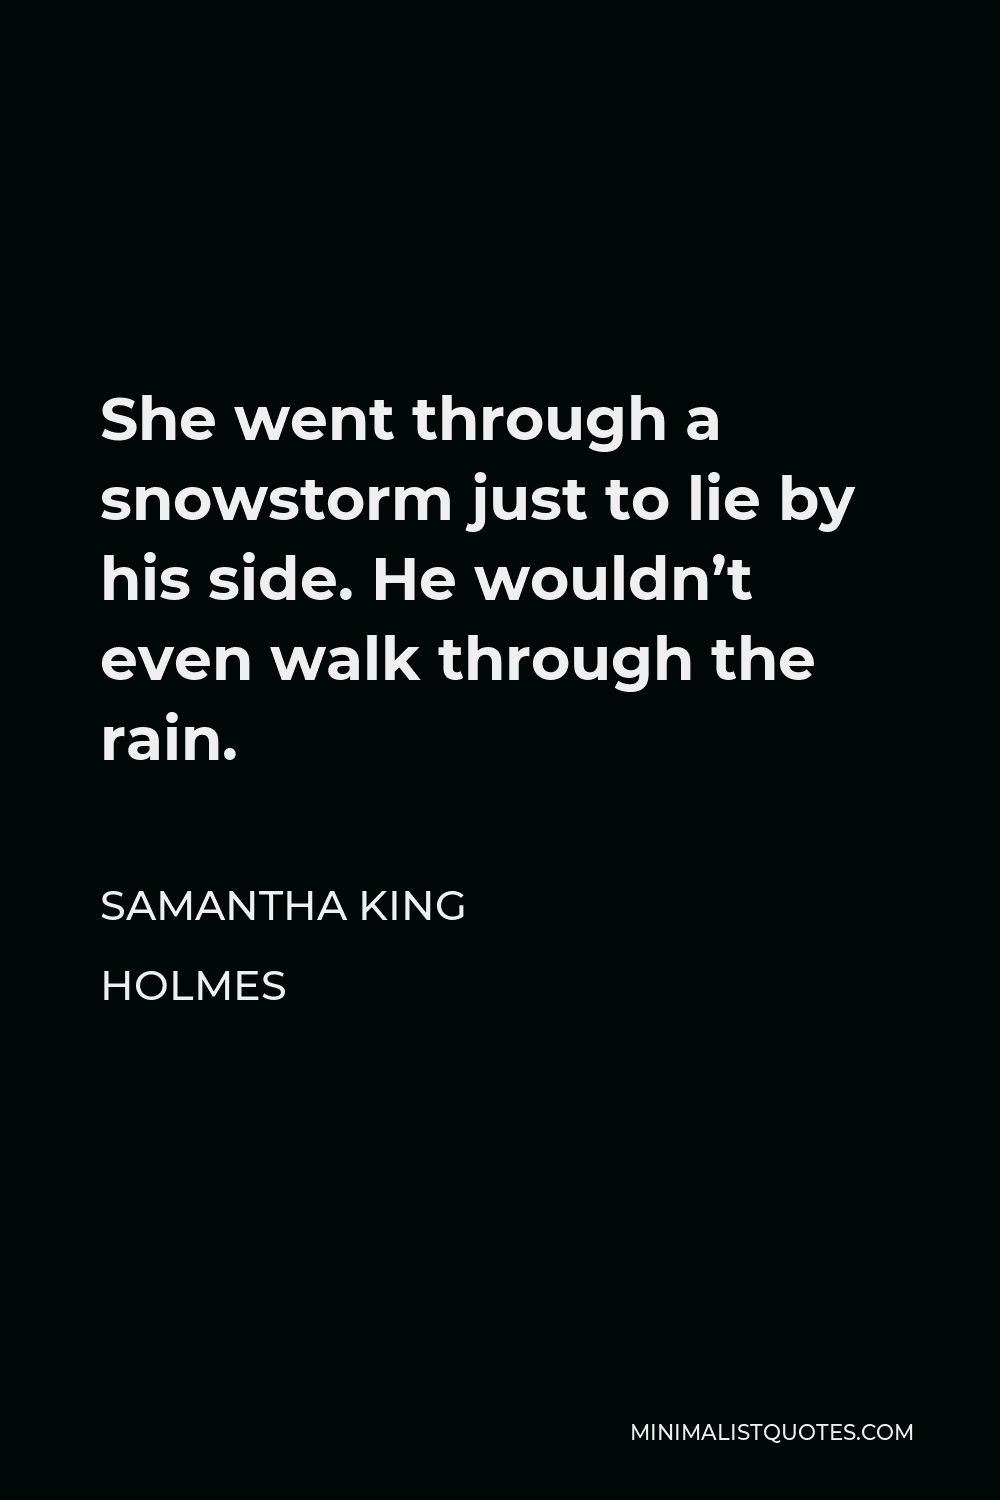 Samantha King Holmes Quote - She went through a snowstorm just to lie by his side. He wouldn’t even walk through the rain.